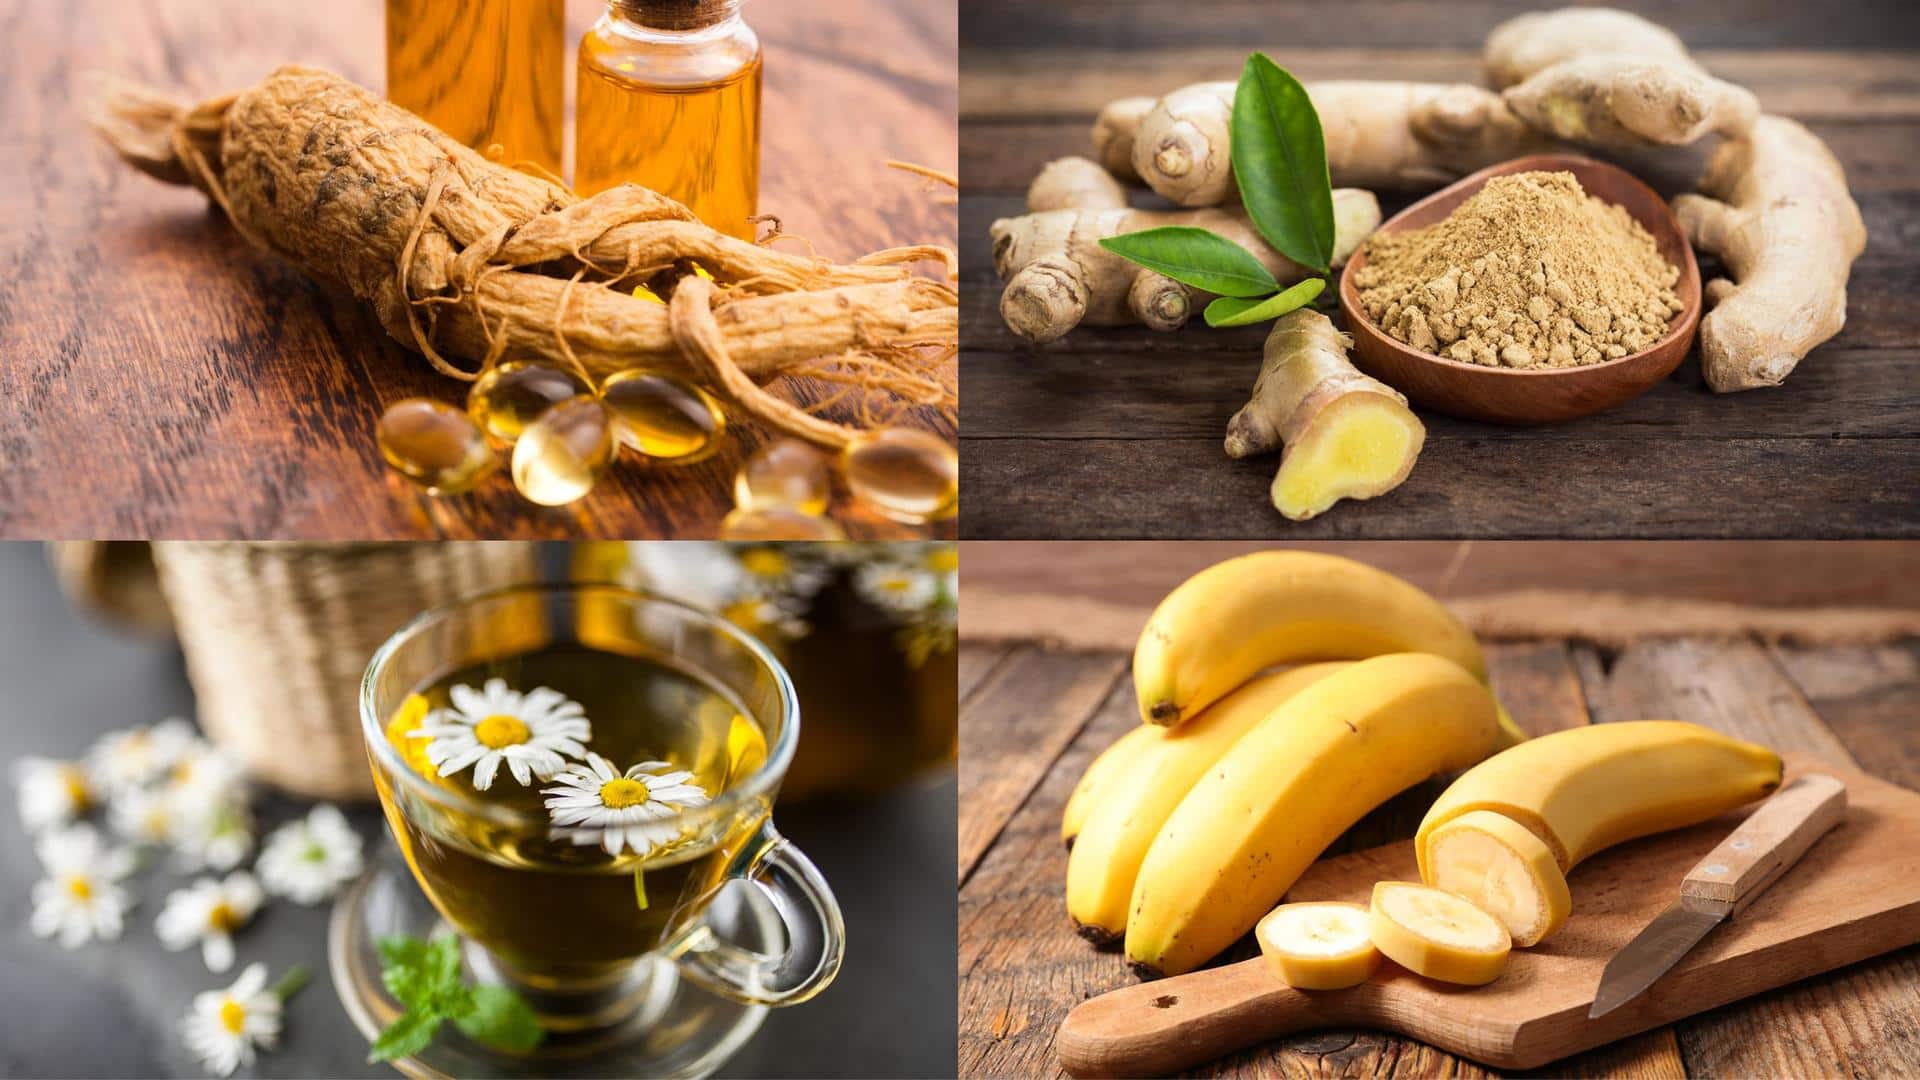 Looking for a hangover cure? Try these natural home remedies 